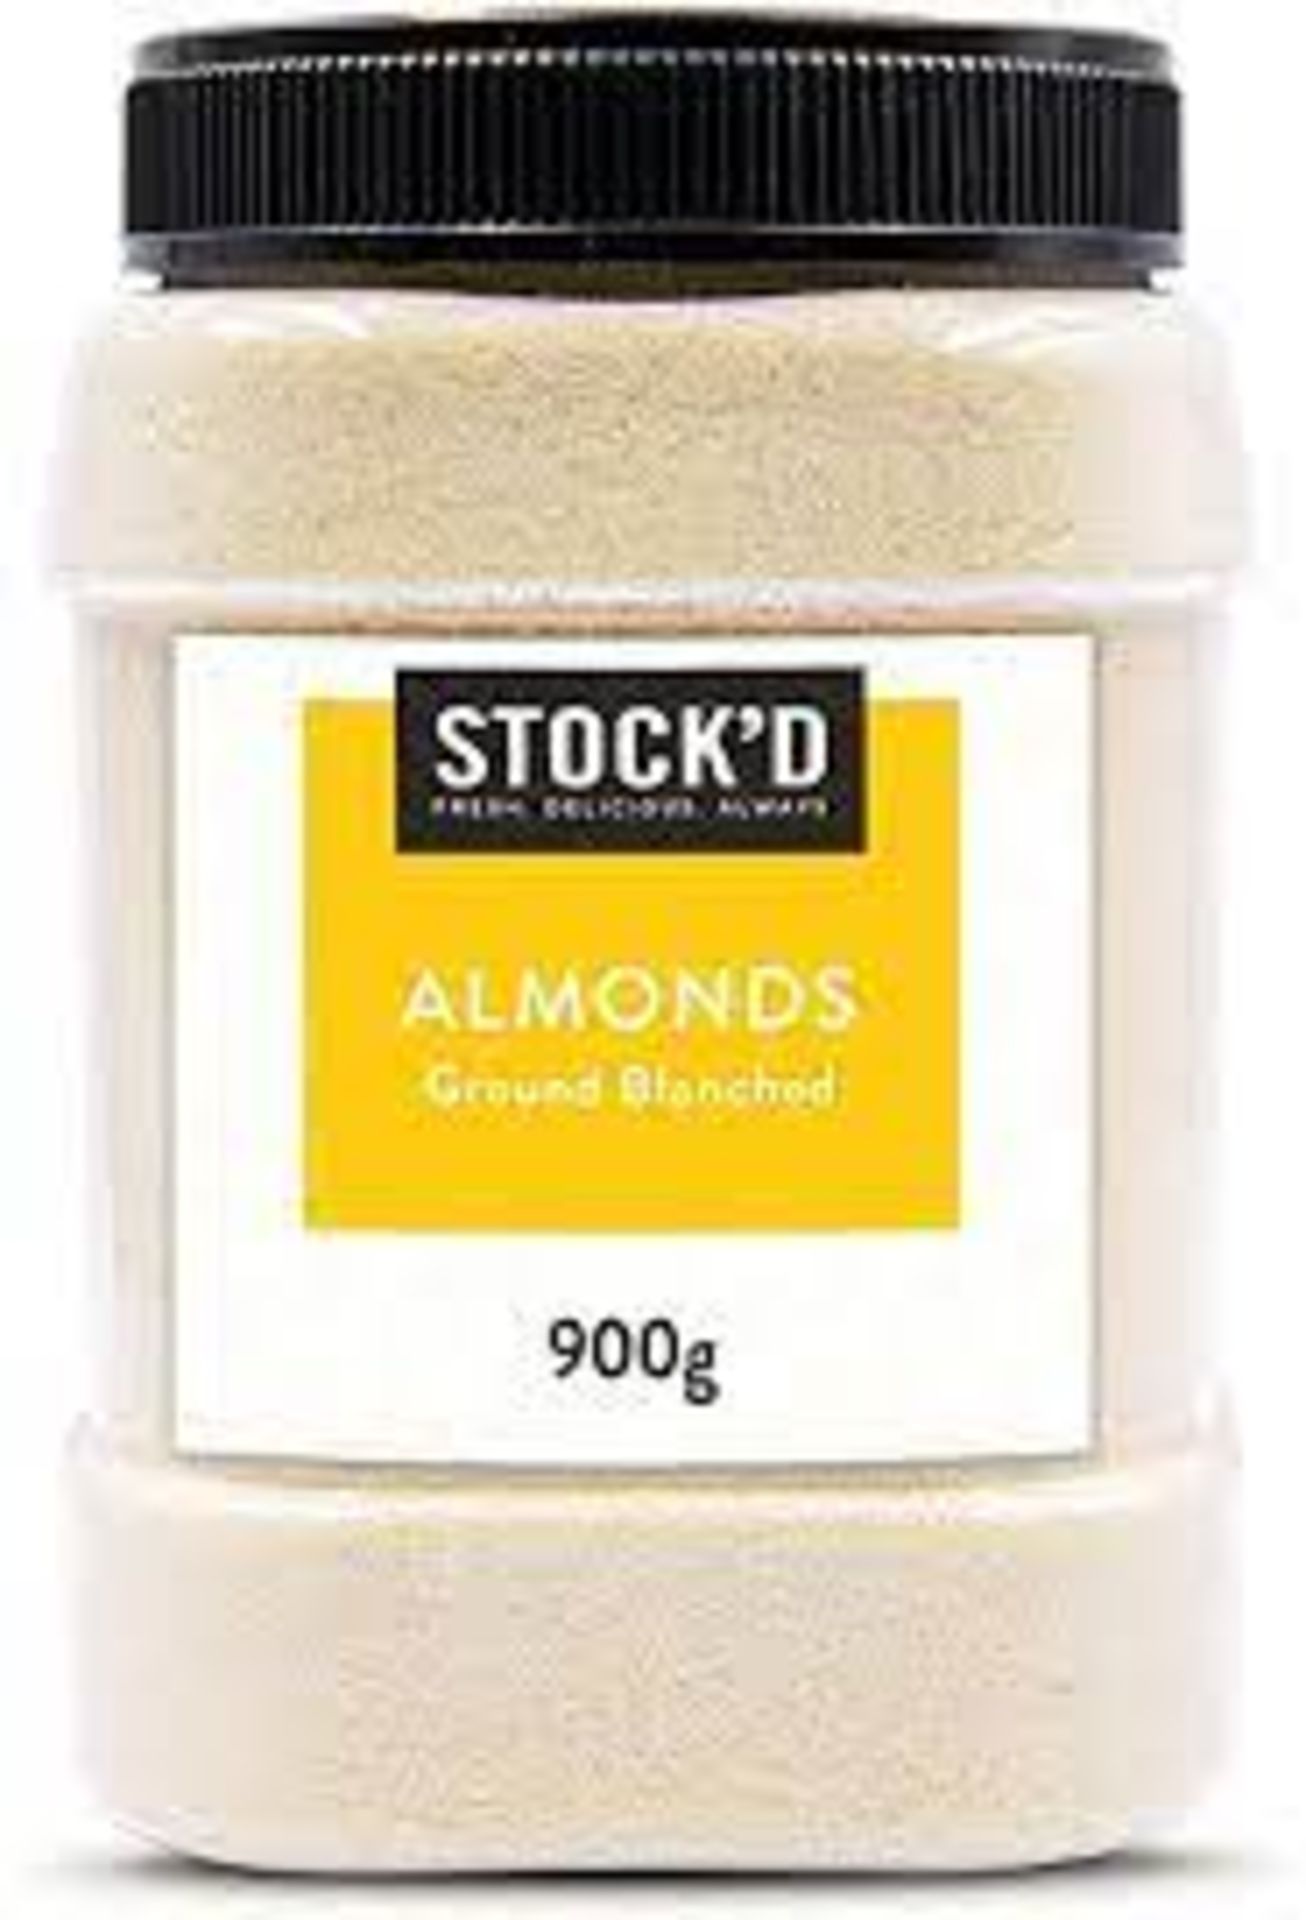 RRP £401 (Count 197) Spw42X5950K Stock'D Almond Flour, 900G, Ground Blanched Almonds, Gluten Free